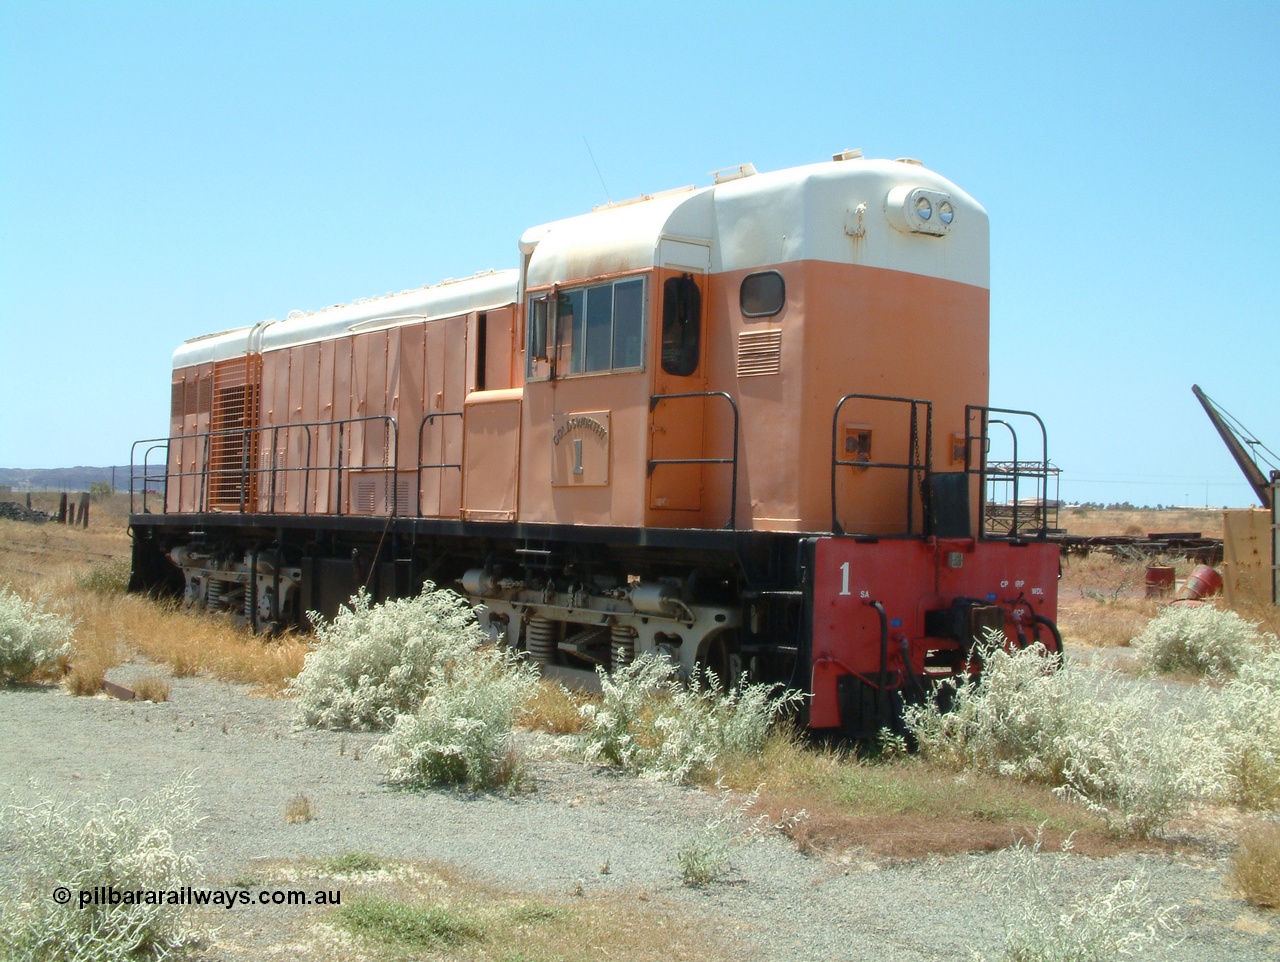 041014 122600
Pilbara Railways Historical Society, Goldsworthy Mining Ltd B class unit 1, an English Electric built ST95B model, originally built in 1965 serial A-104, due to accident damage rebuilt on new frame with serial A-232 in 1970. These units of Bo-Bo design with a 6CSRKT 640 kW prime mover and built at the Rocklea Qld plant. Donated to Society in 1995. 14th October 2004.
Keywords: B-class;English-Electric-Qld;ST95B;A-104;A-232;GML;Goldsworthy-Mining;